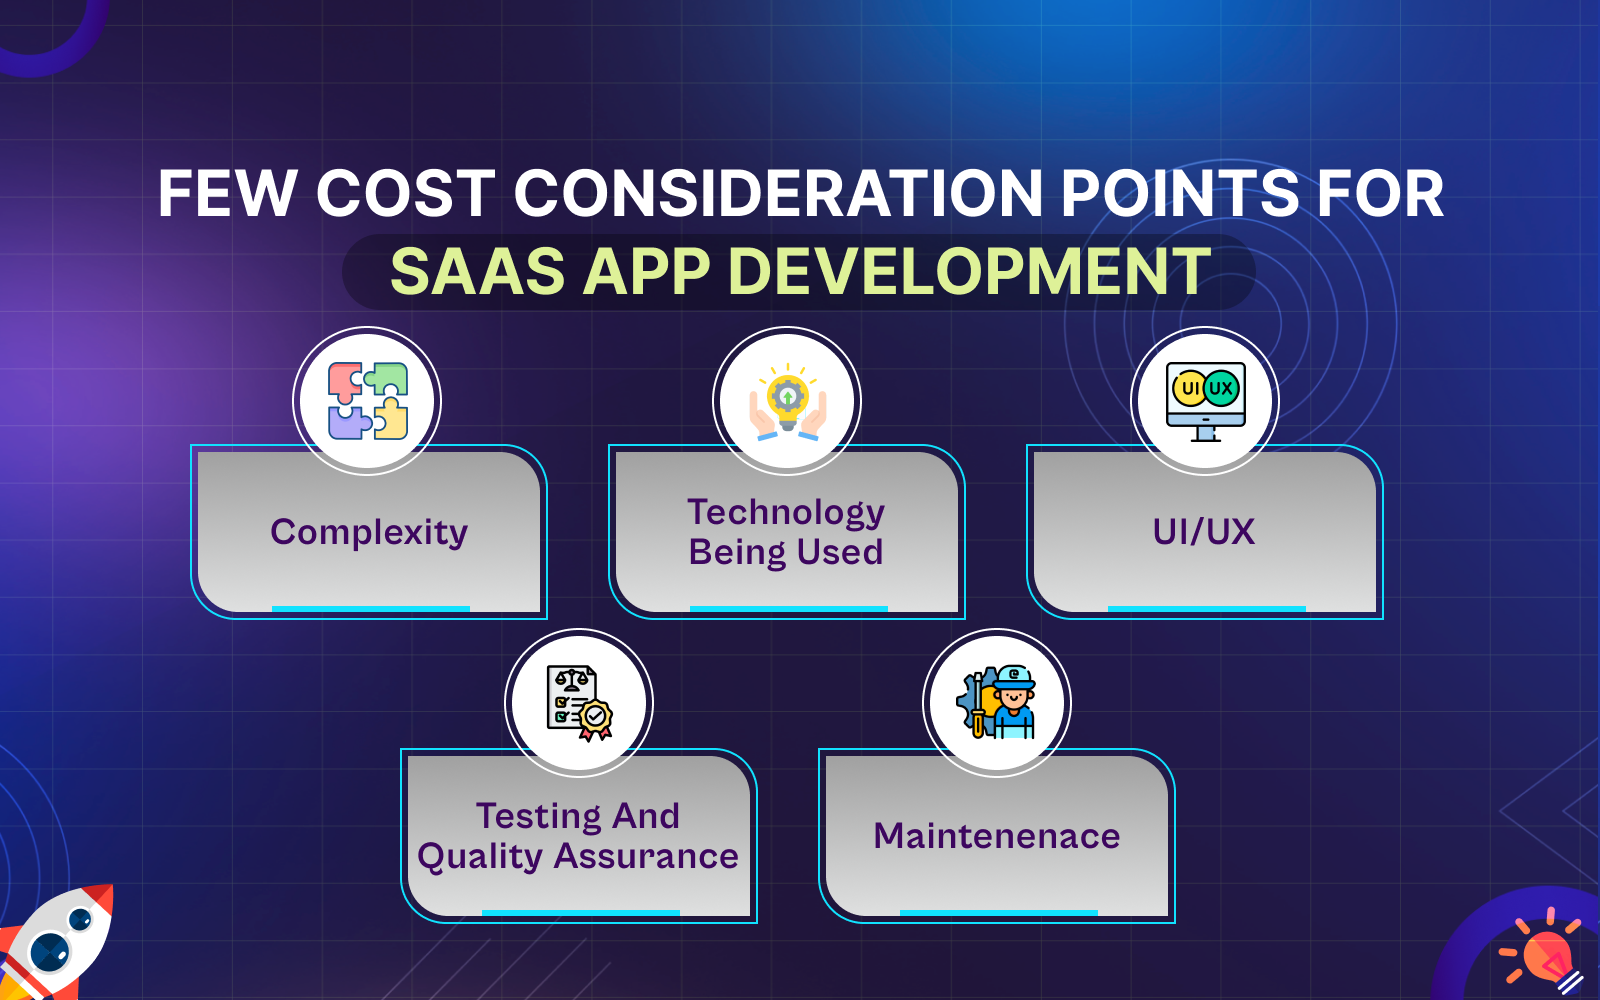 <img src="Few-Cost-Consideration-Points-for-SaaS-App-Development.png" alt="Few-Cost-Consideration-Points-for-SaaS-App-Development">